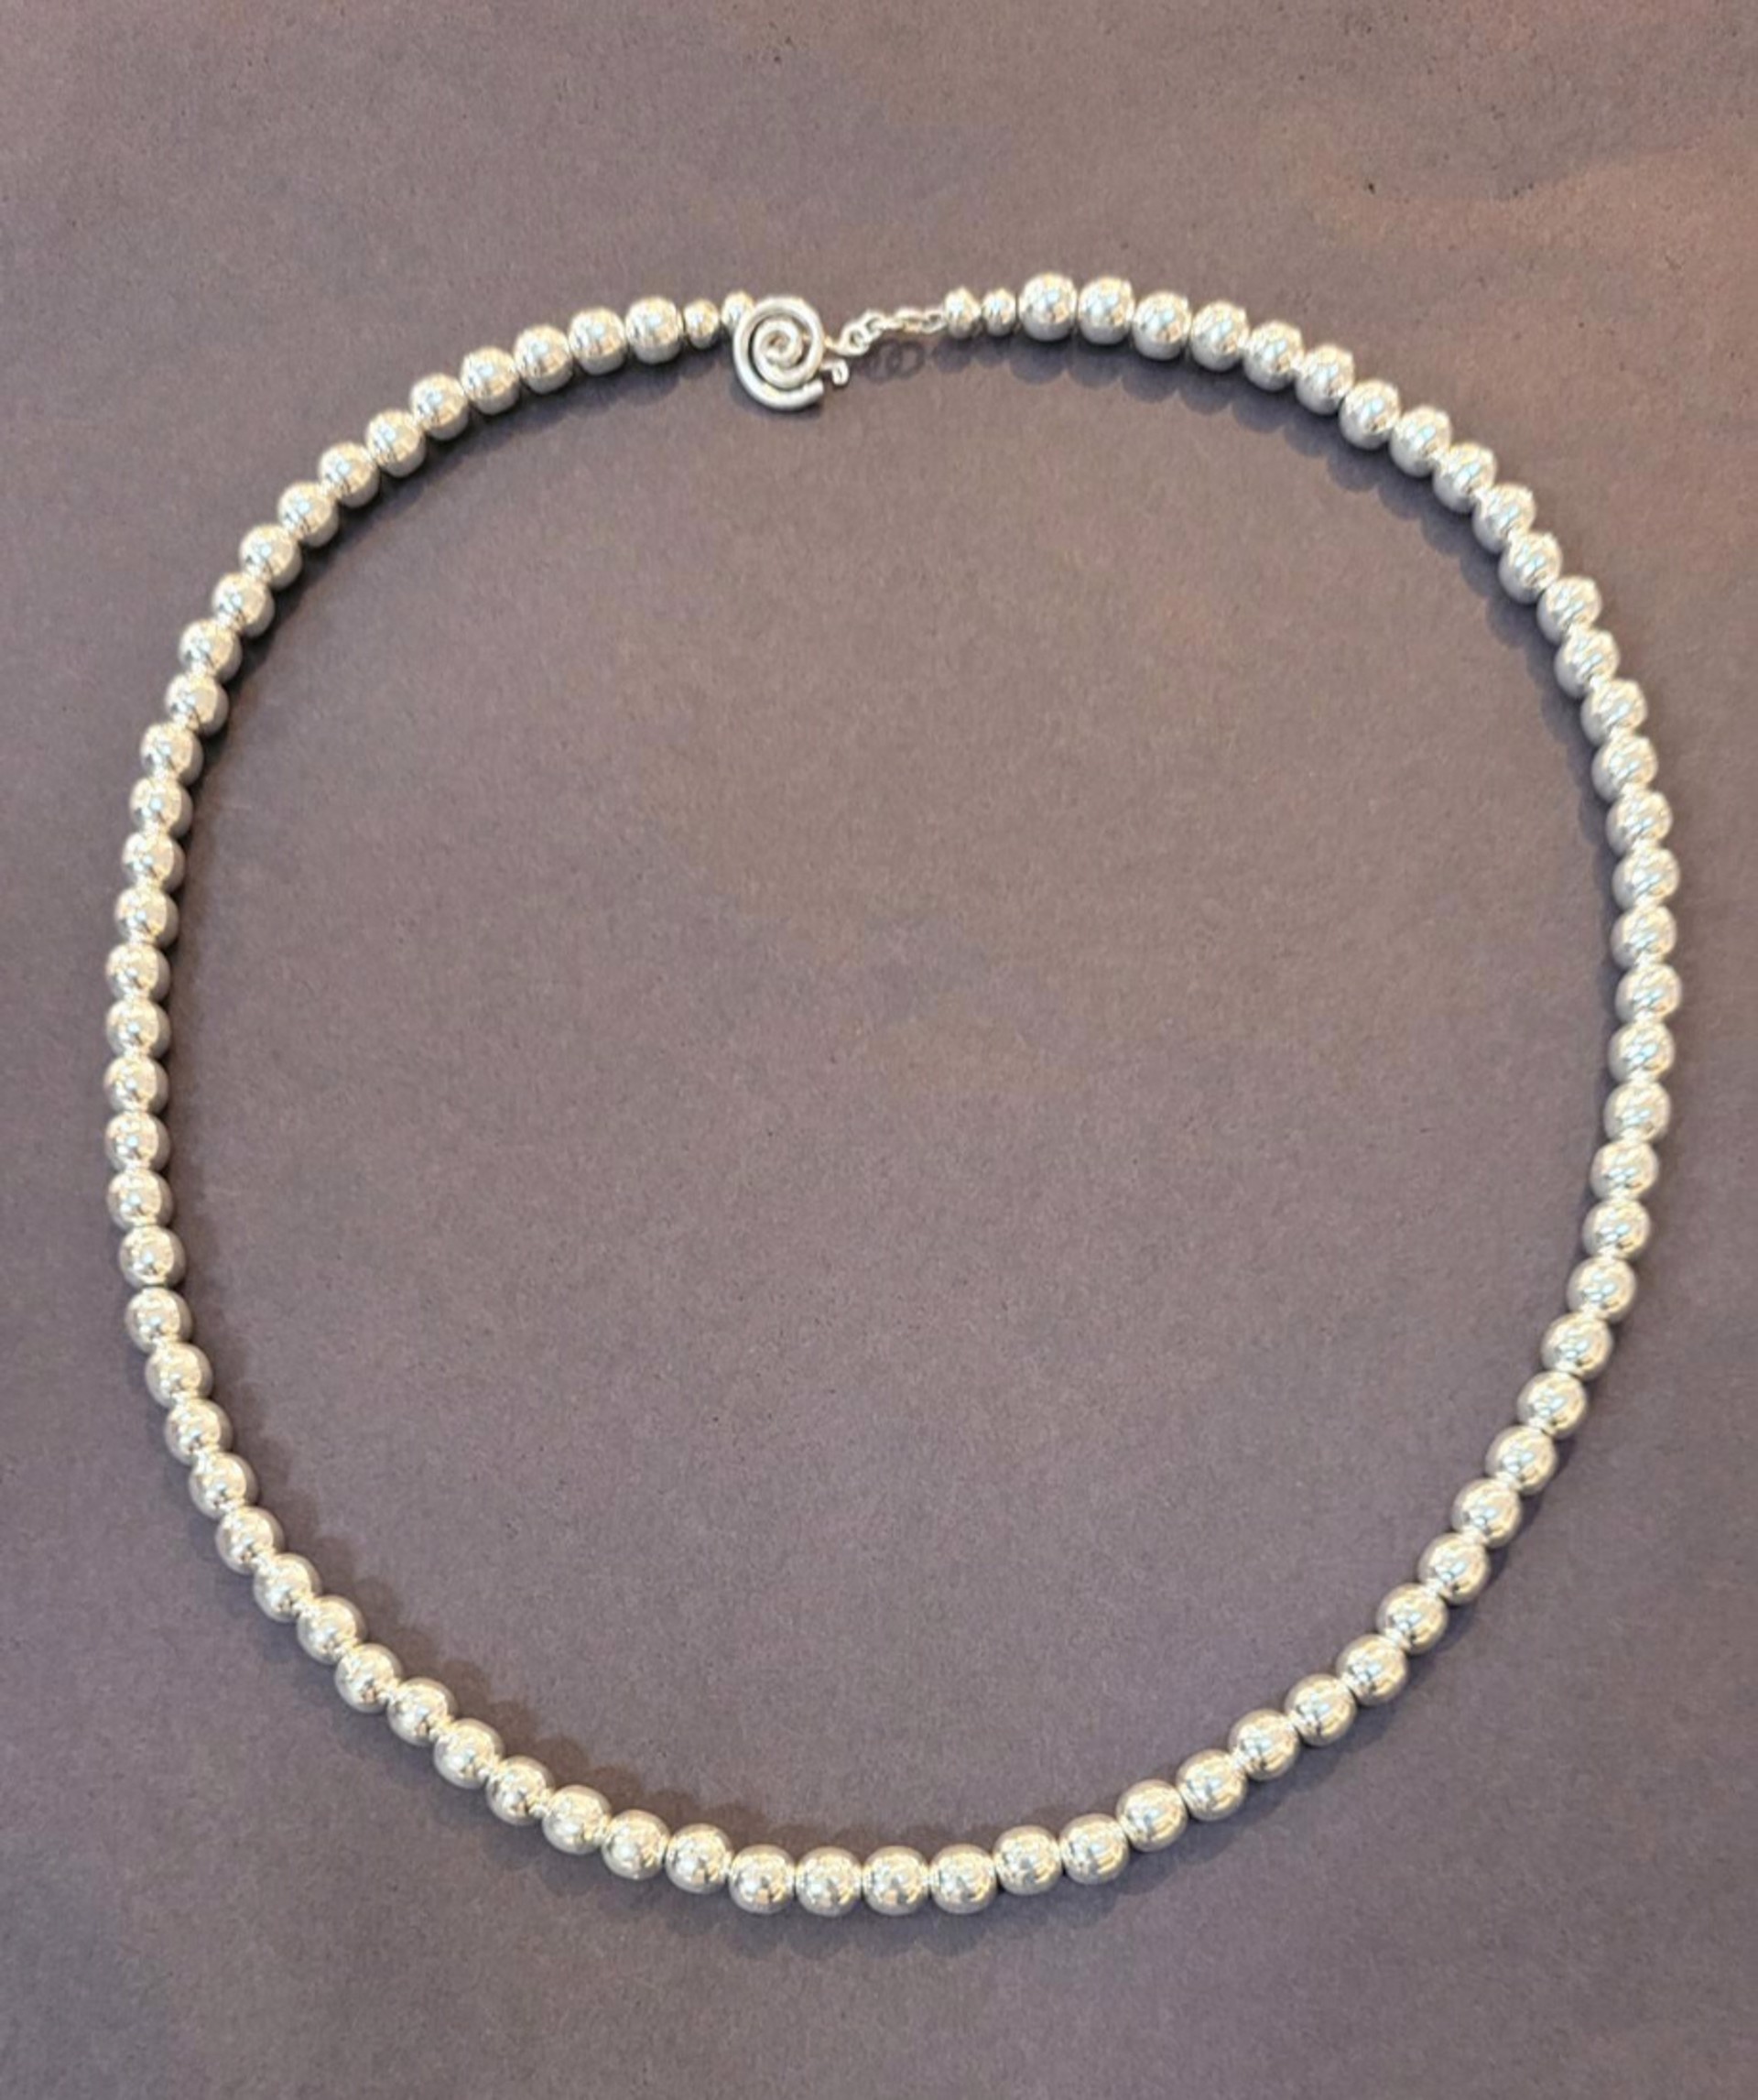 Necklace - Handcrafted 22" 8mm Sterling Silver Pearls by Indigo Desert Ranch - Jewelry